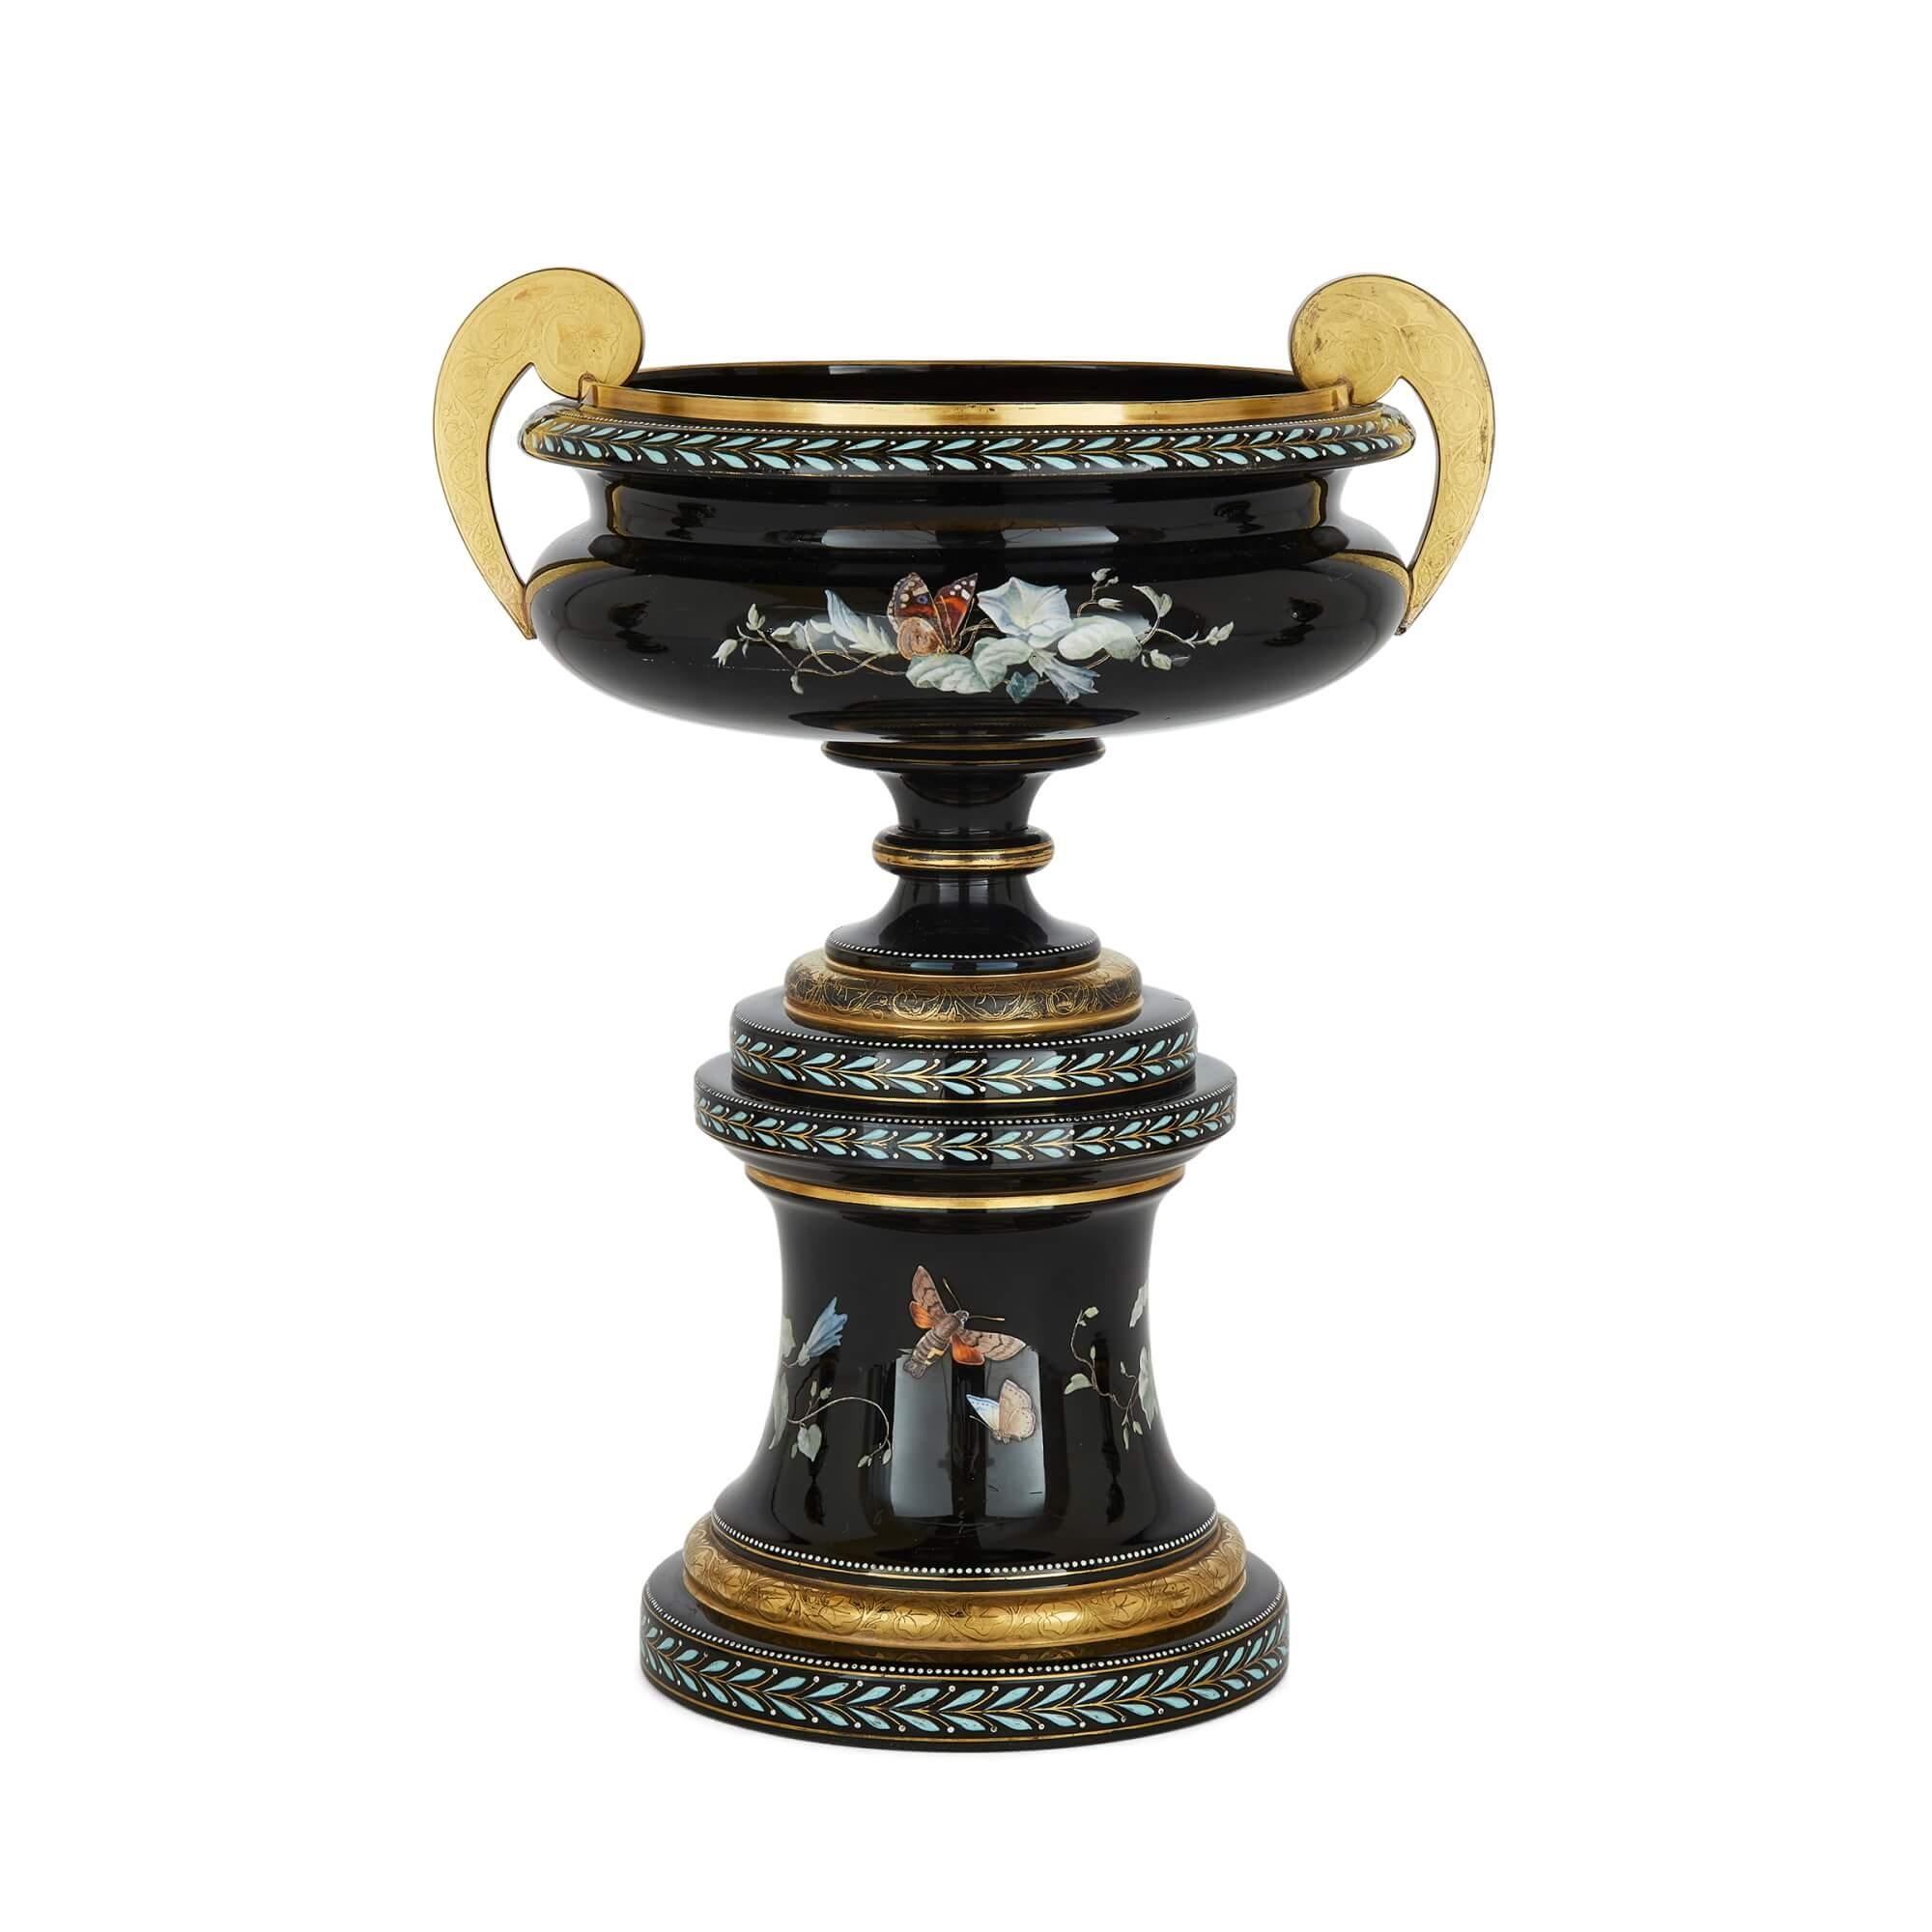 This beautiful three-vase garniture set is made from enamelled black glass, and dates from late nineteenth century Bohemia. Attributed to Gräflich Schaffgotsch'sche Josephinenhütte, in Schreiberhau, Silesia, it is possibly crafted after designs by